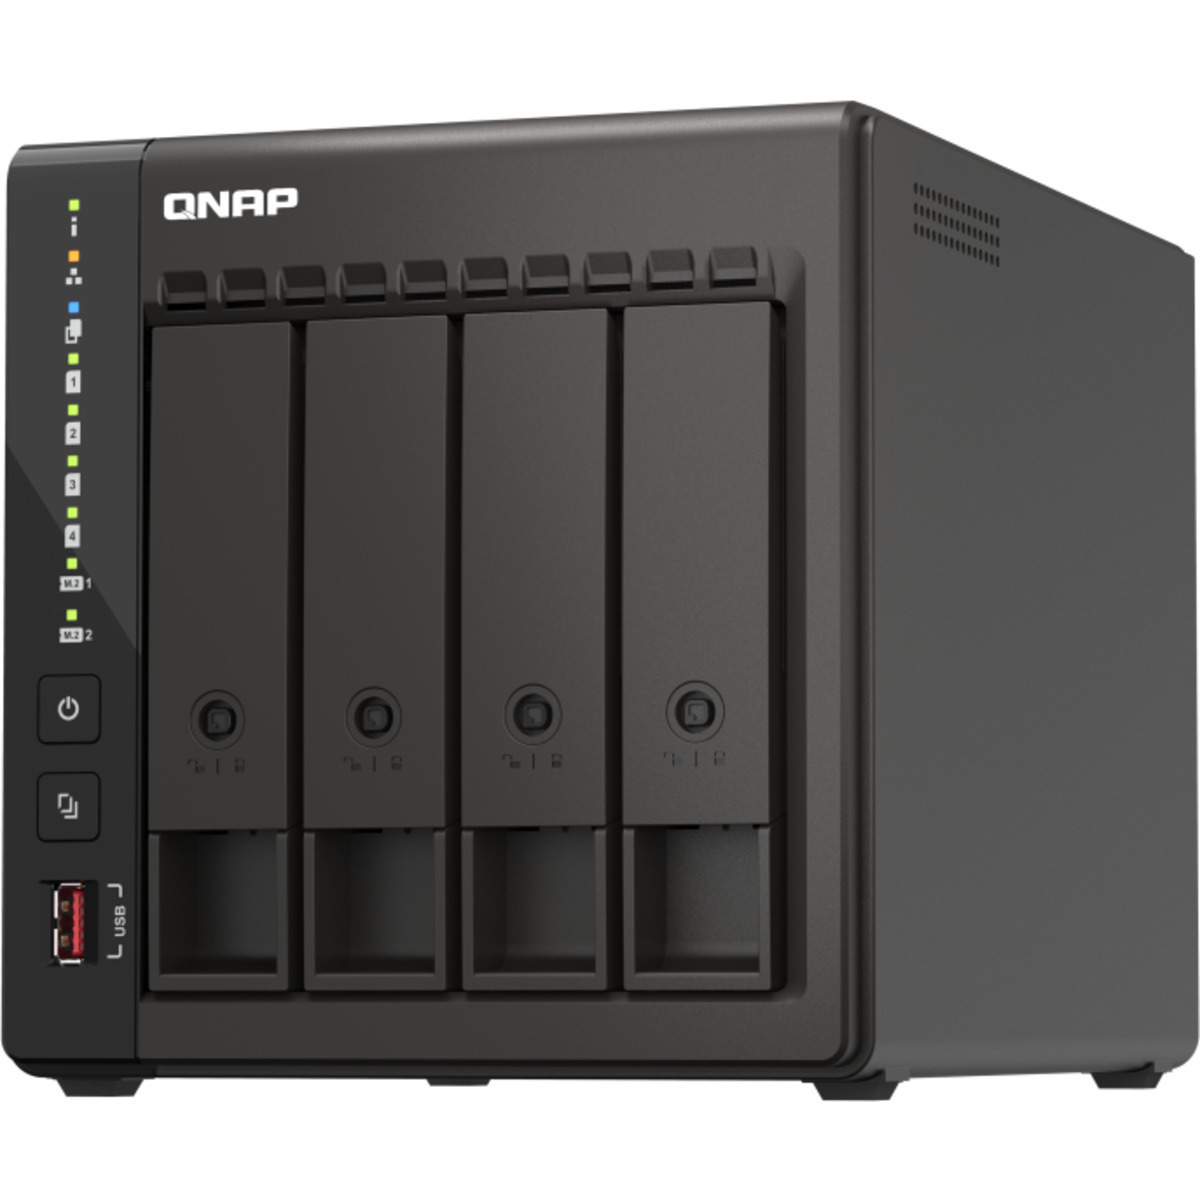 QNAP TS-453E 28tb 4-Bay Desktop Multimedia / Power User / Business NAS - Network Attached Storage Device 2x14tb Seagate IronWolf ST14000VN0008 3.5 7200rpm SATA 6Gb/s HDD NAS Class Drives Installed - Burn-In Tested TS-453E